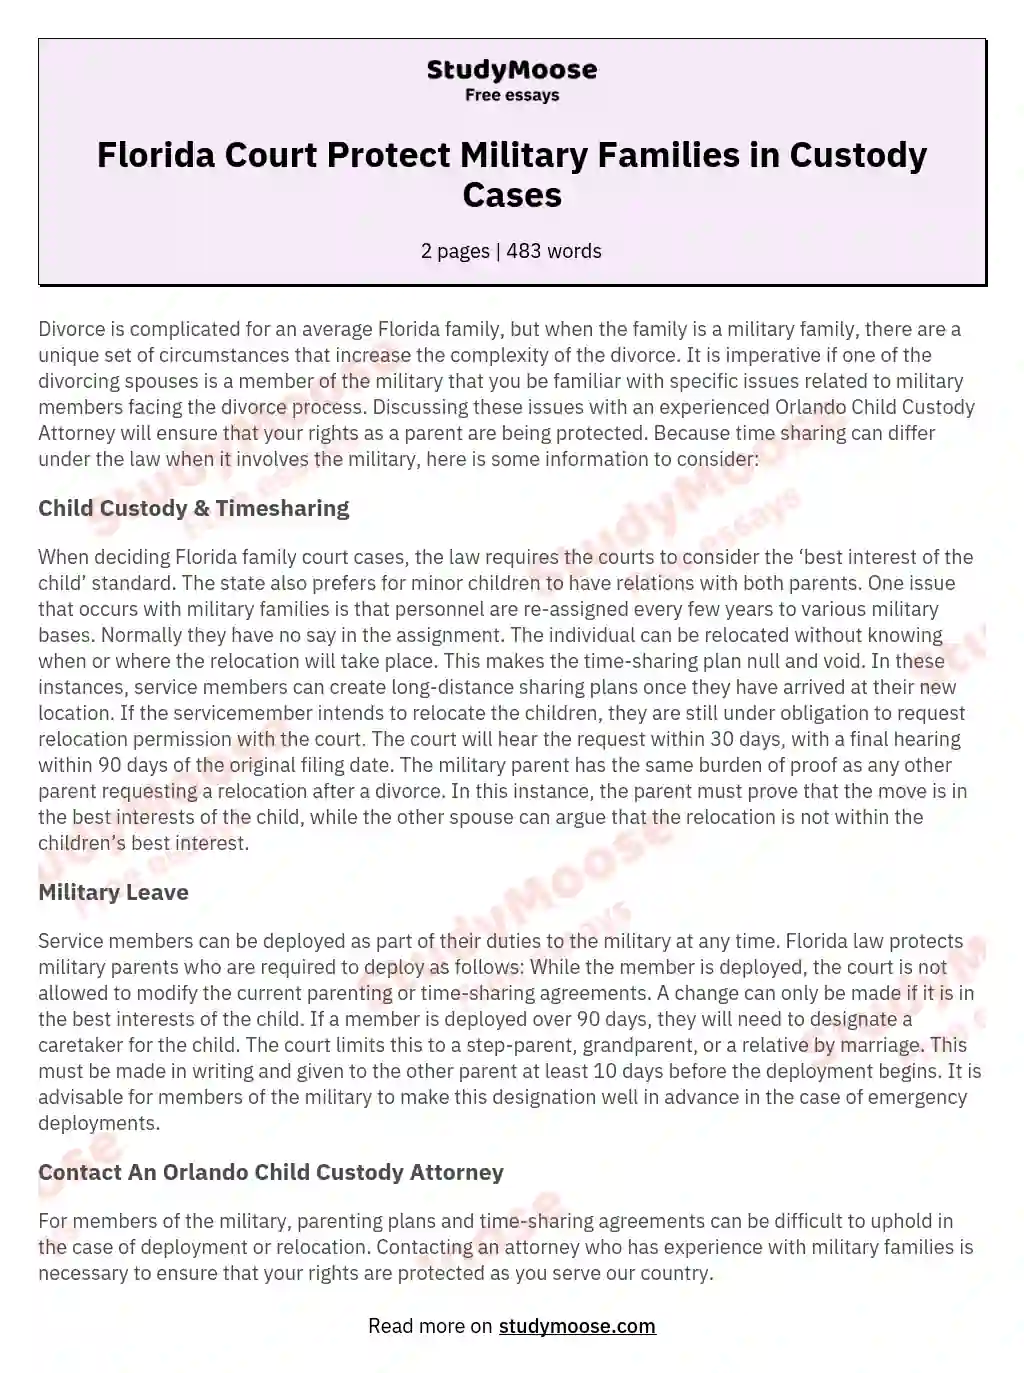 Florida Court Protect Military Families in Custody Cases essay